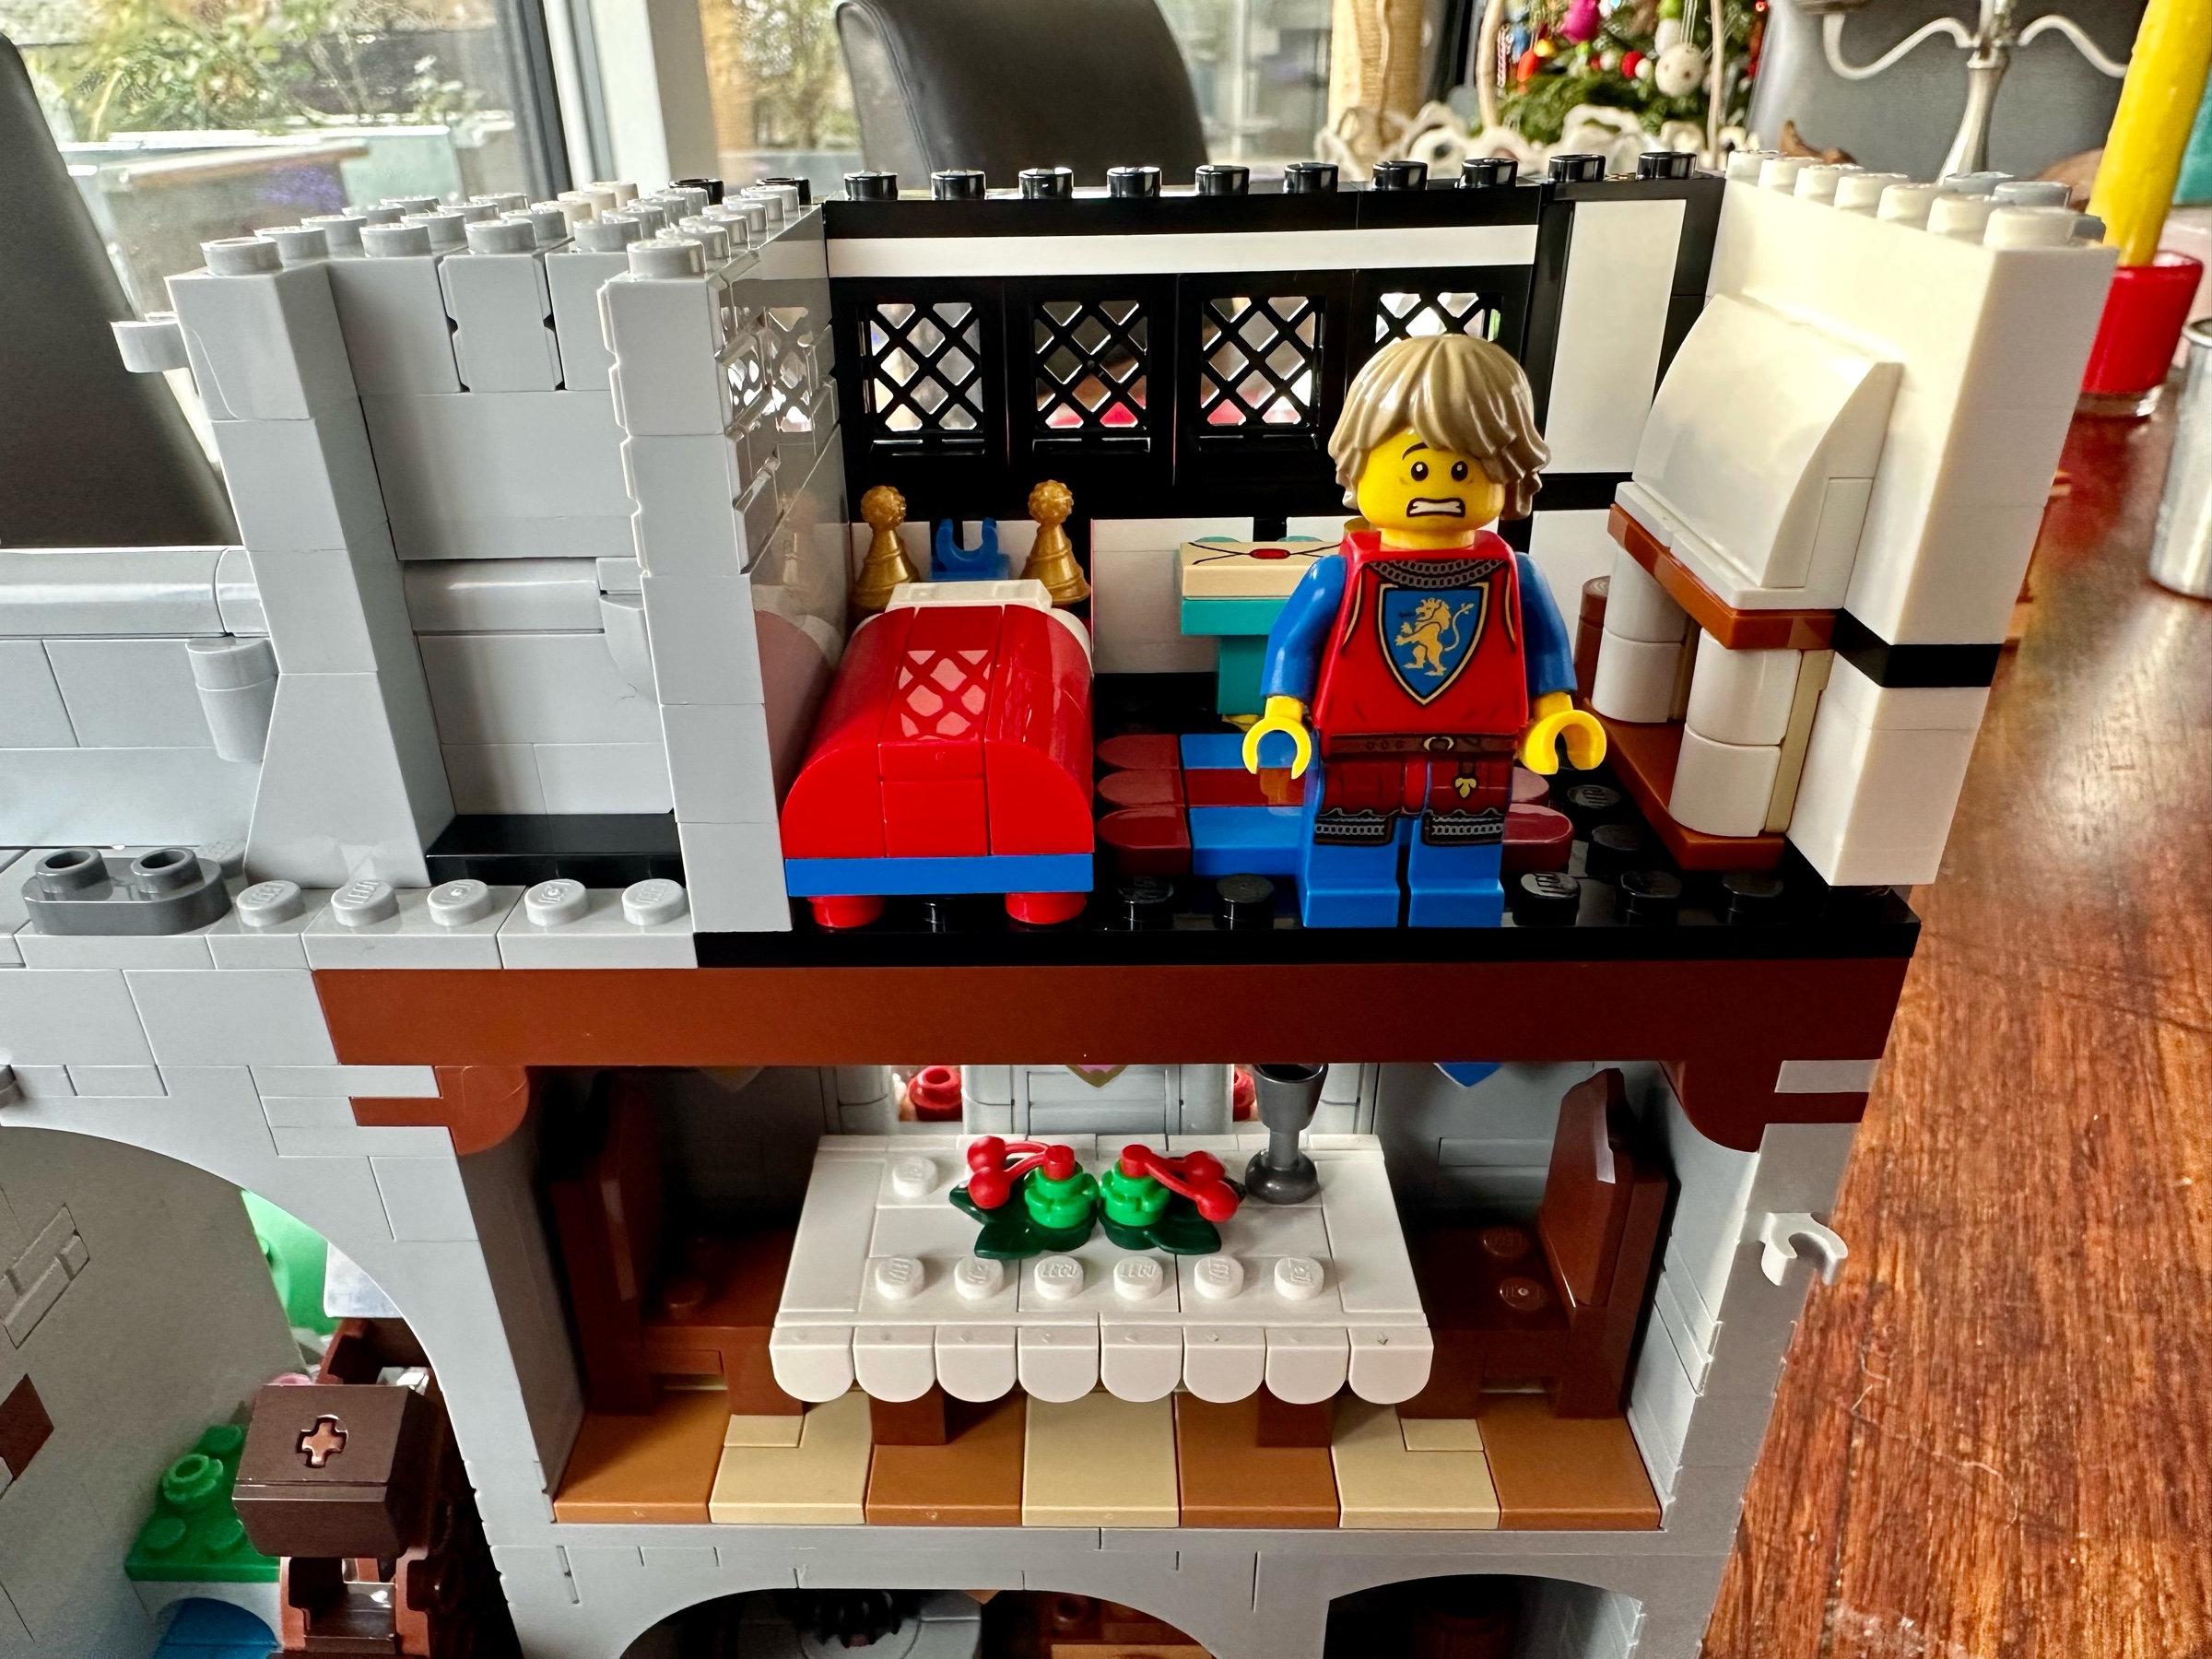 Interior view of LEGO castle child's room with bed on left, desk in the middle, and fireplace on the right. A young squire with a frightened expression stands in front of the desk.